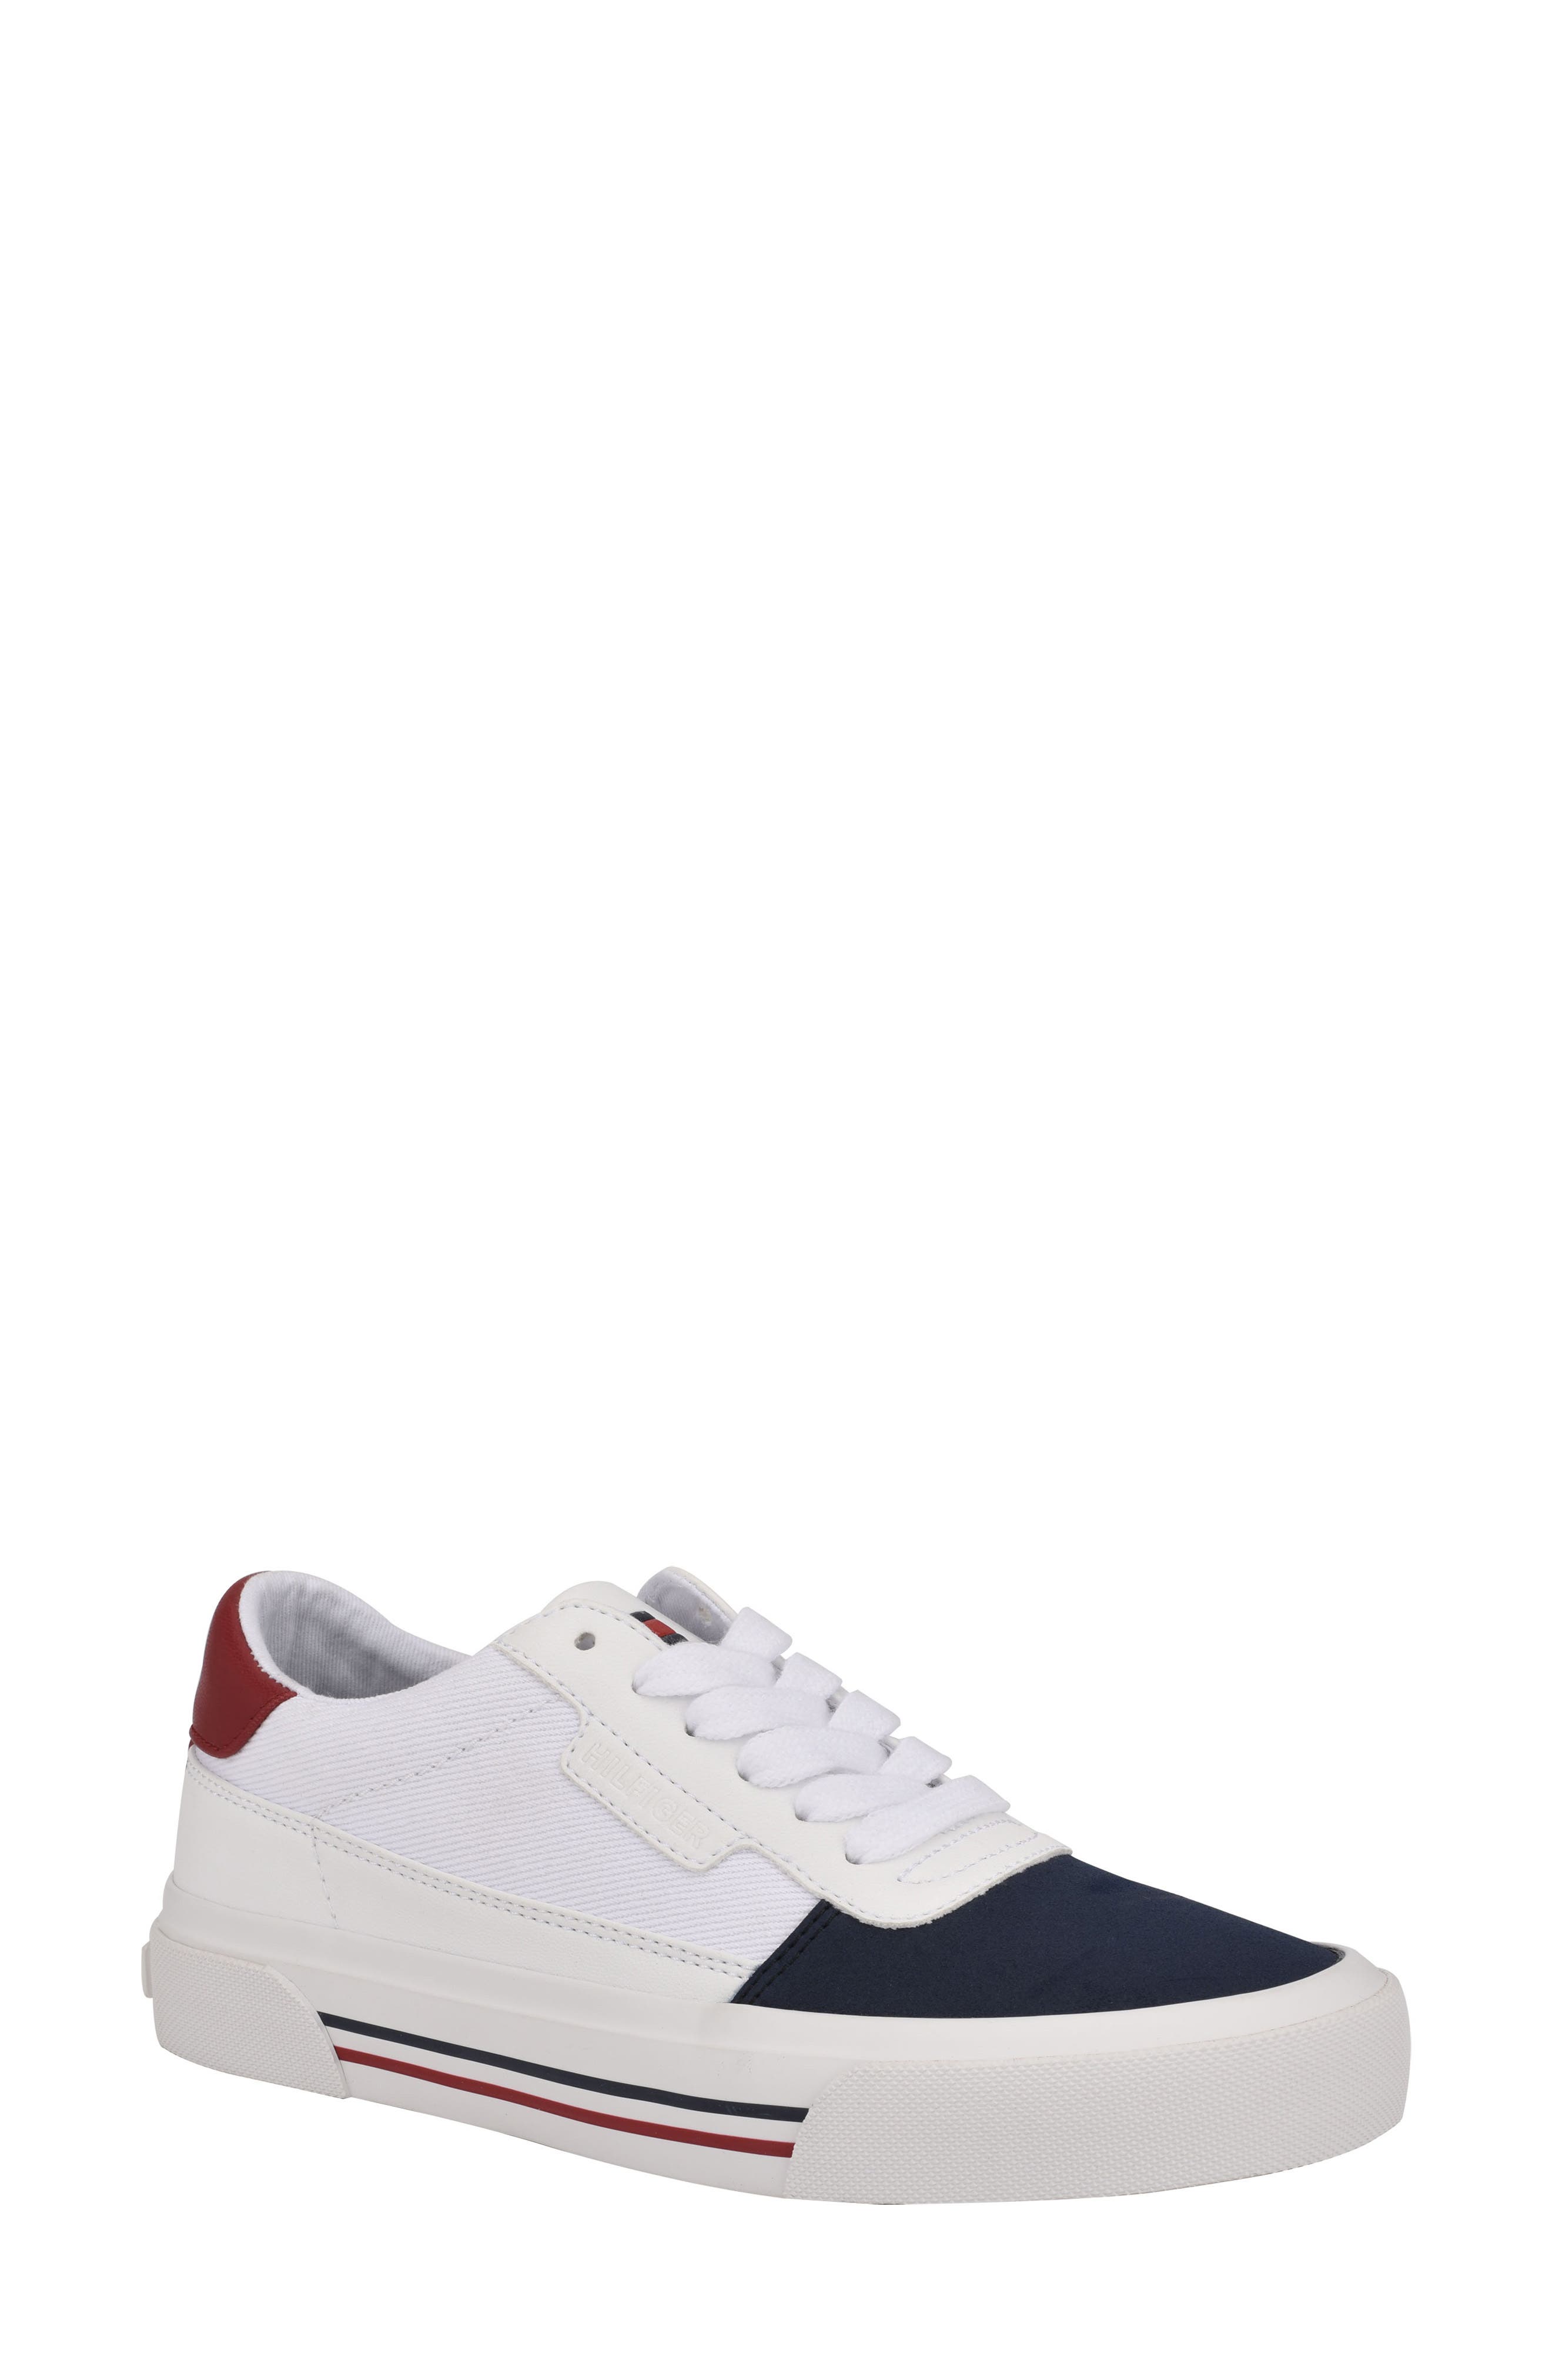 tommy hilfiger shoes with strap